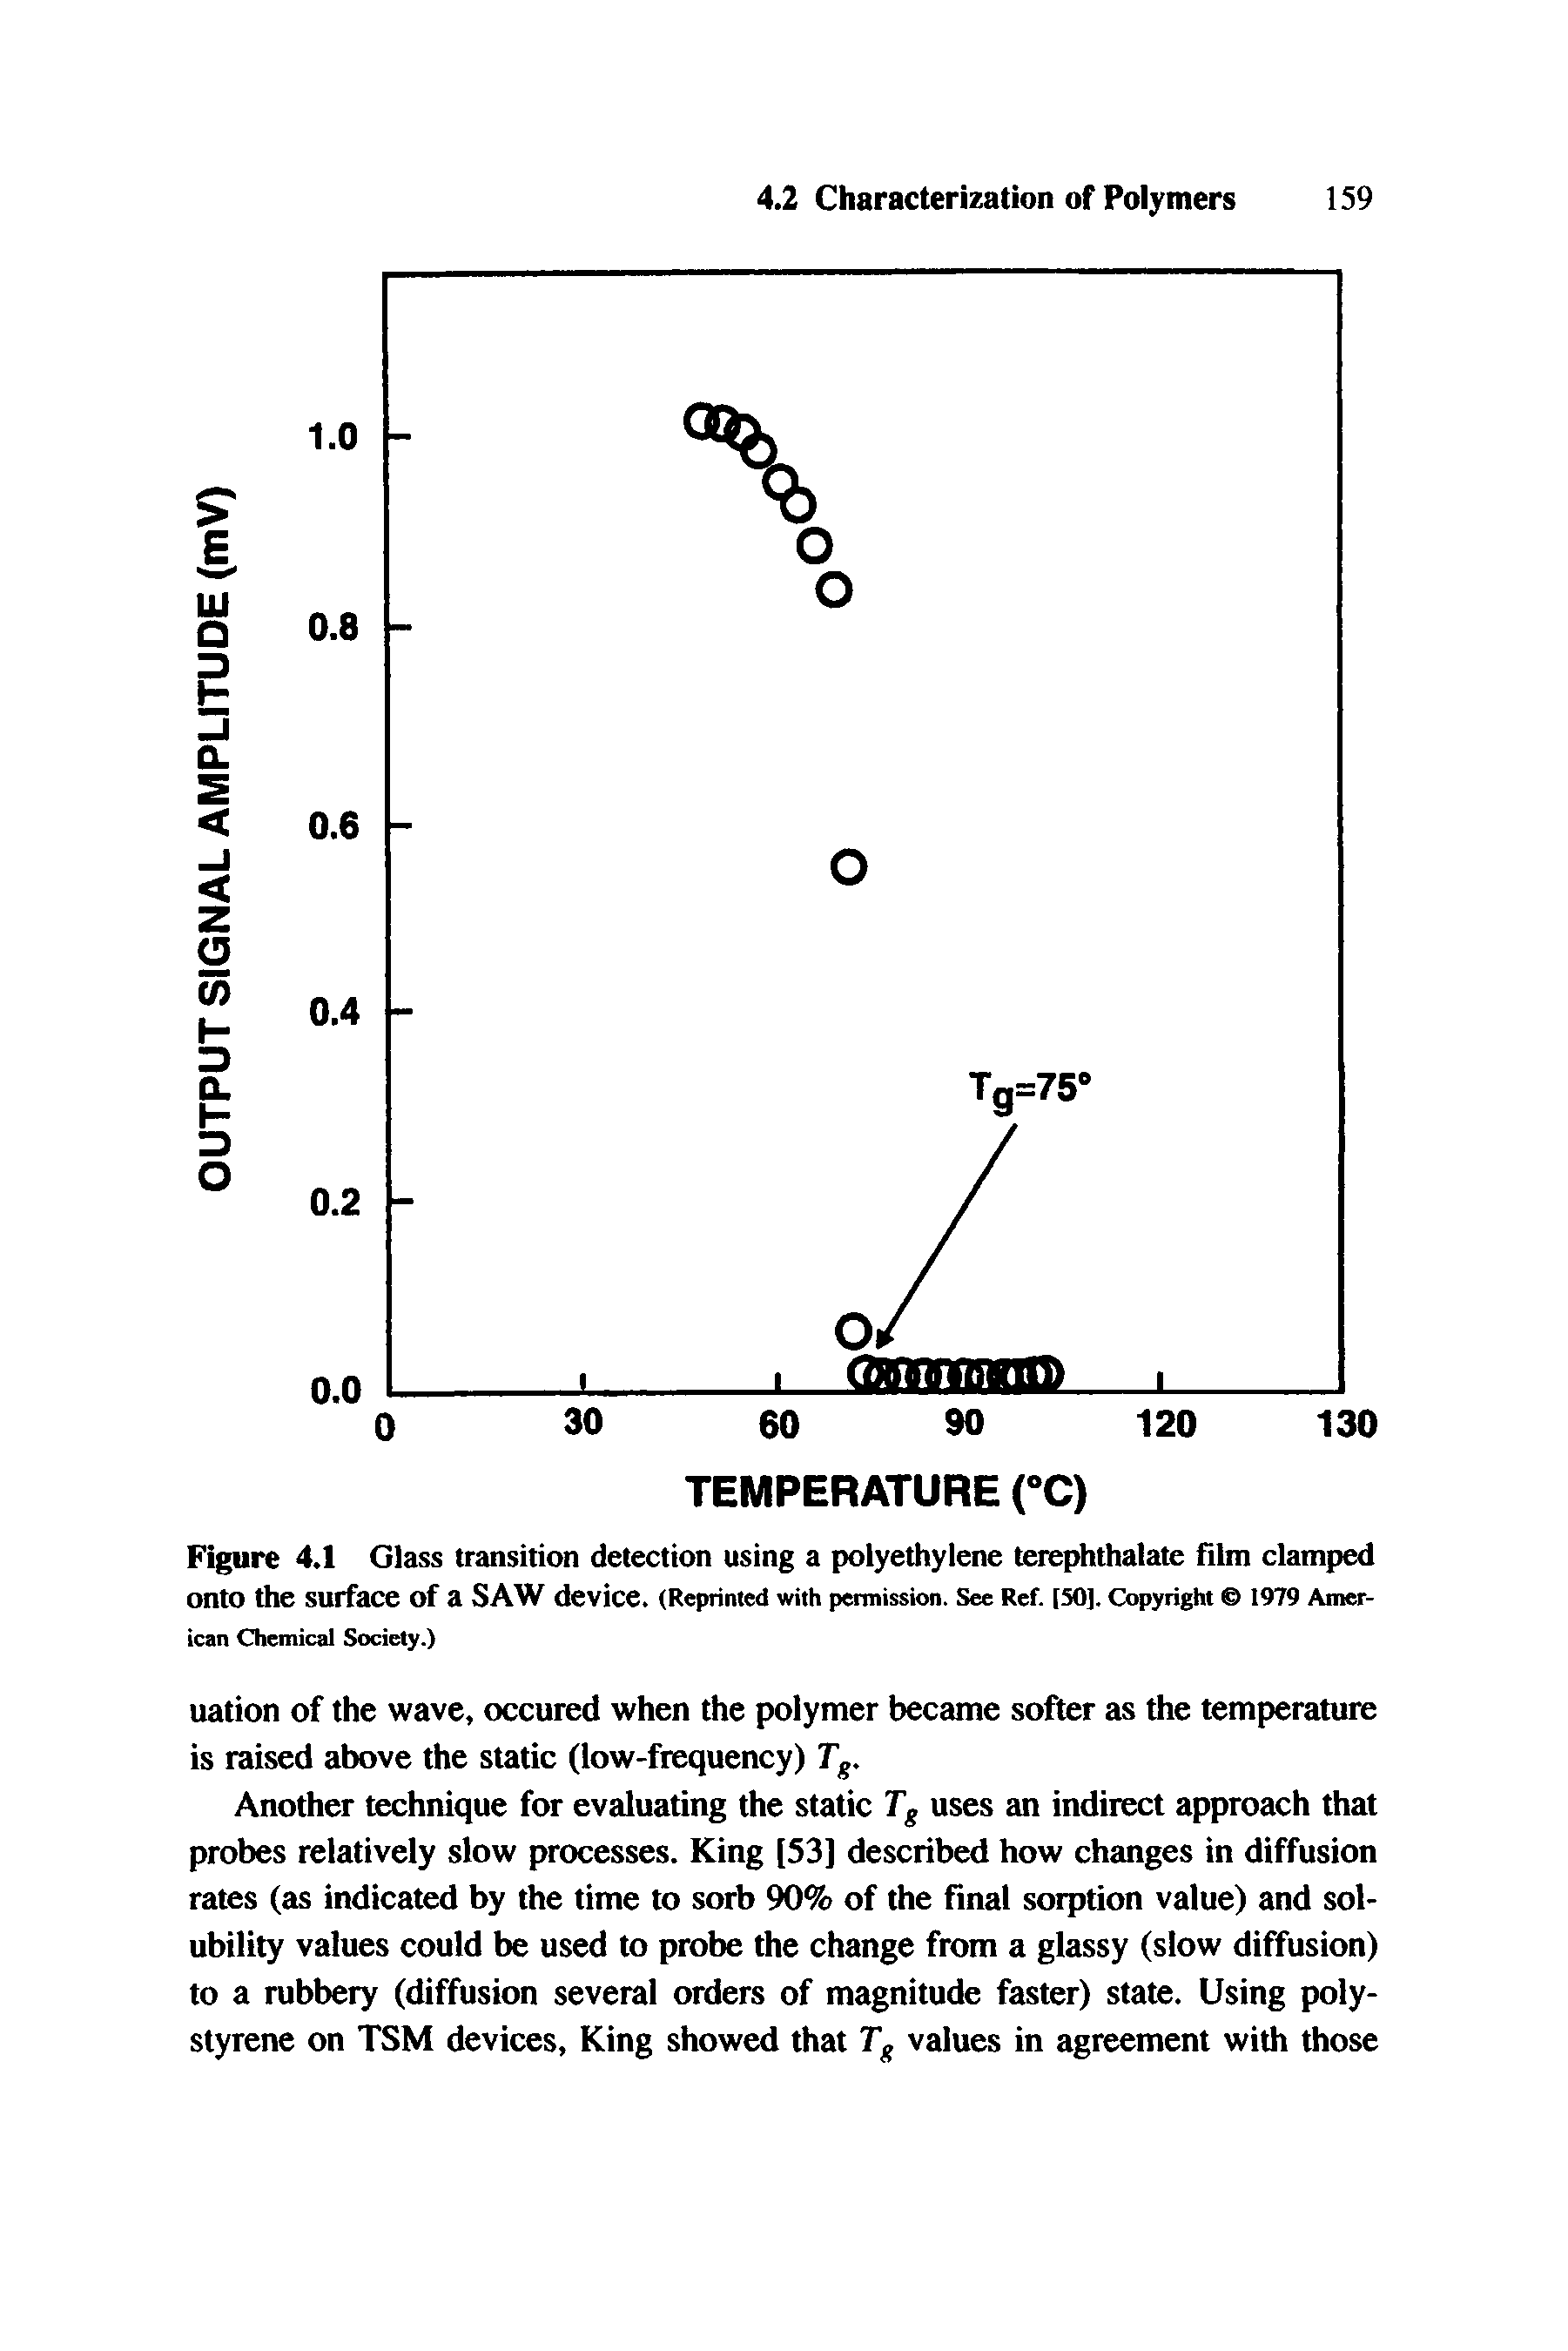 Figure 4.1 Glass transition detection using a polyethylene terephthalate Him clamped onto the surface of a SAW device. (Reprinted with permission. See Ref. [SO]. Copyright 6 1979 Amer-lean Chemical Society.)...